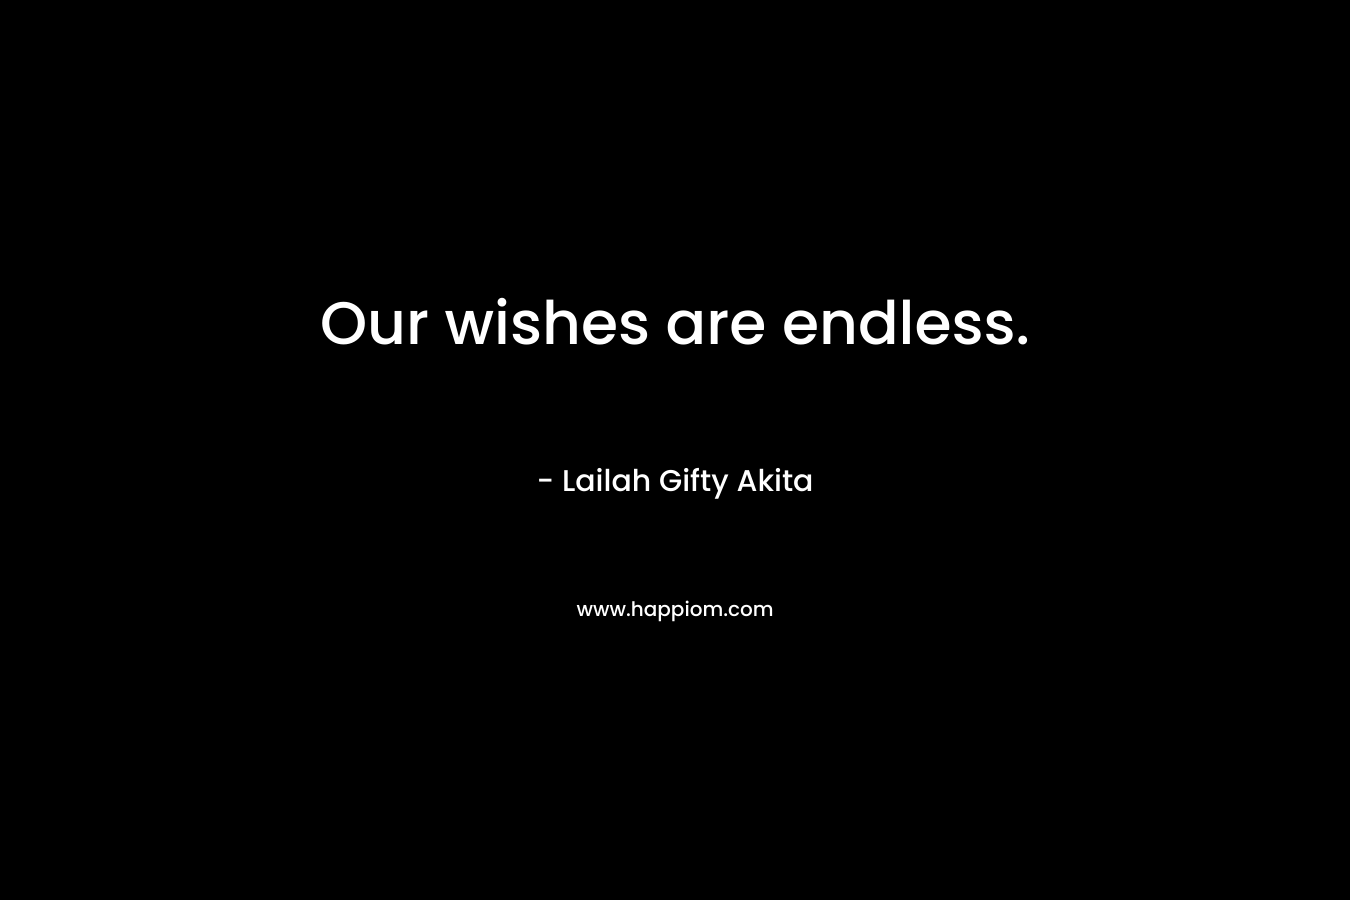 Our wishes are endless.